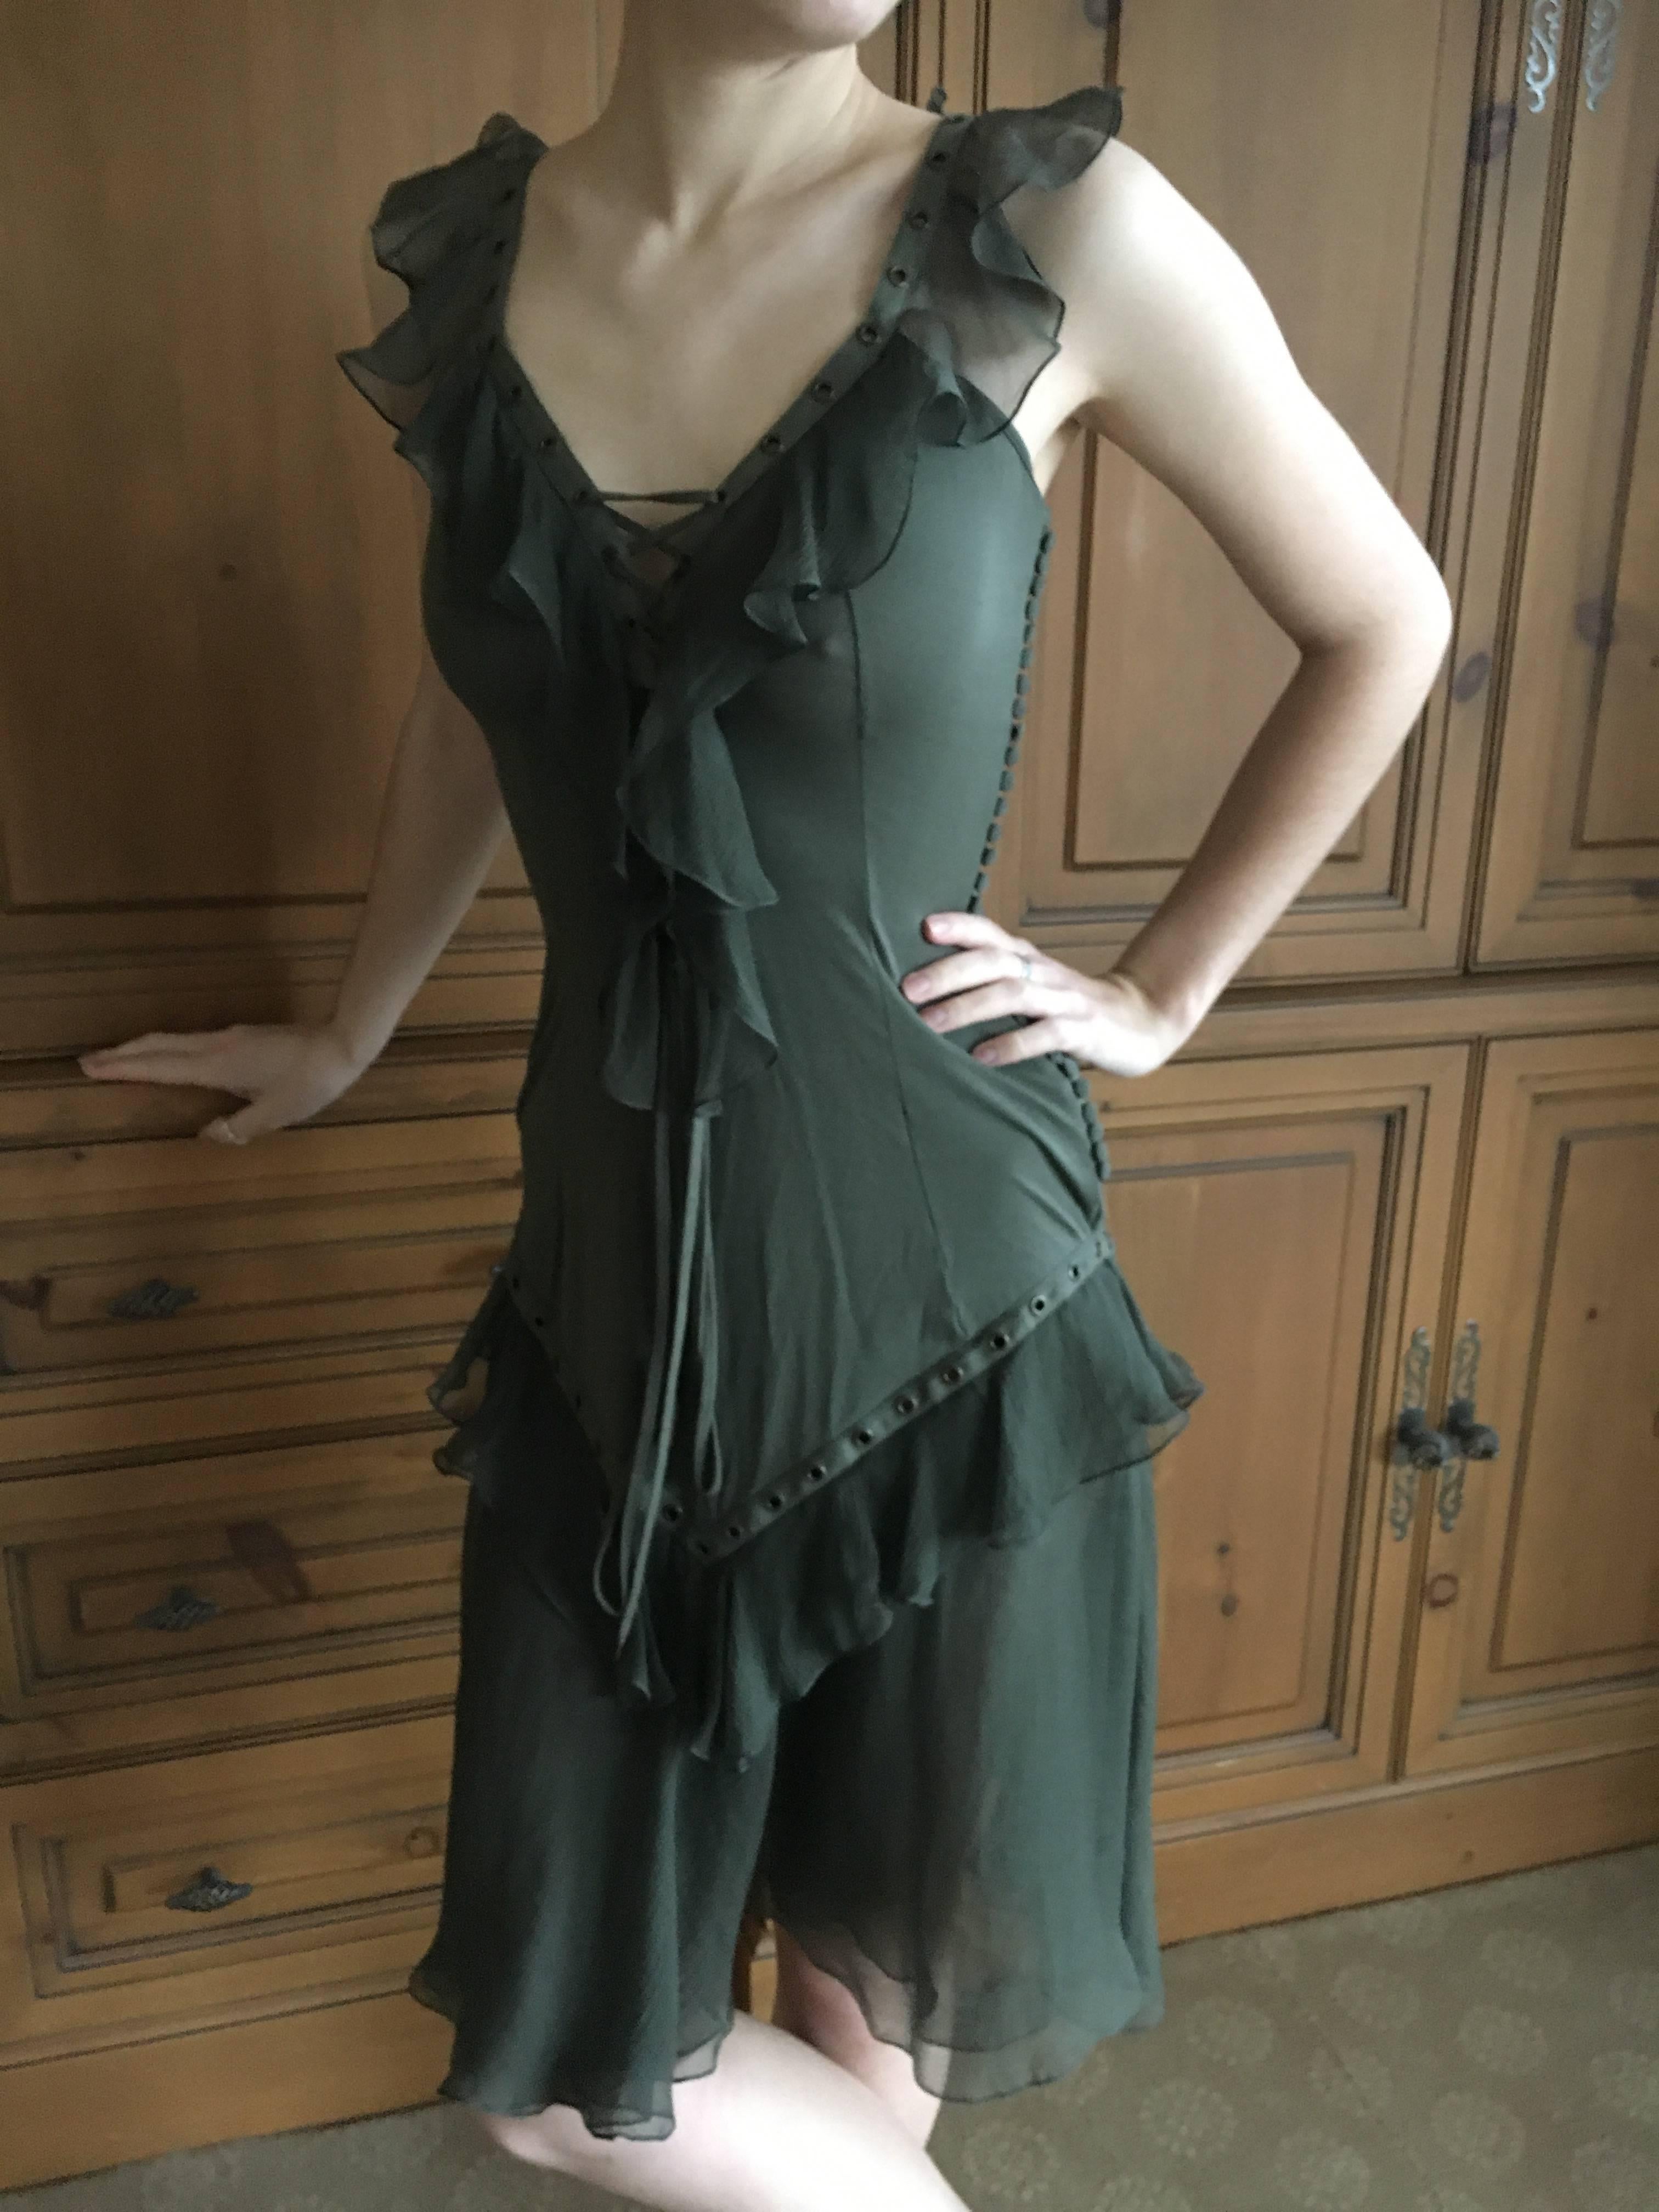 Christian Dior by John Galliano Moss Green Corset Lace Ruffled Silk Dress.
This is such a pretty dress in solid moss green. 
I have only seen this design previously in bold patterns, never a solid color.
Size 36
Bust 35"
Waist